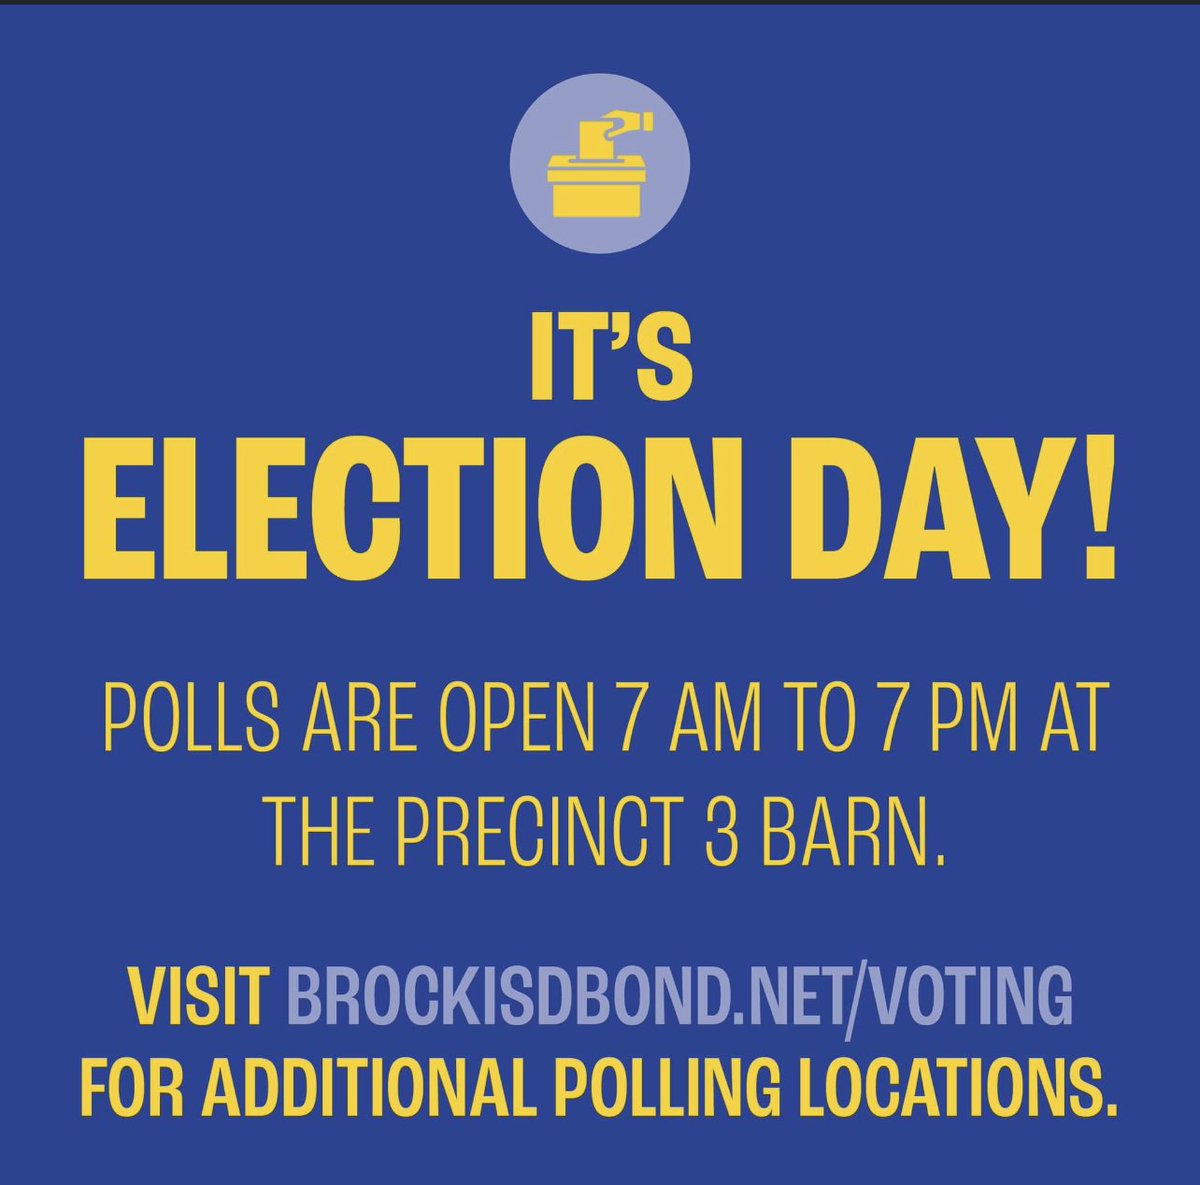 It’s Election Day! Polls are open from 7 am to 7 pm for your final chance to vote in the #BrockISDBond election. The closest polling location to our district is the Parker County Precinct 3 Barn. Visit brockisdbond.net/voting for polling locations.